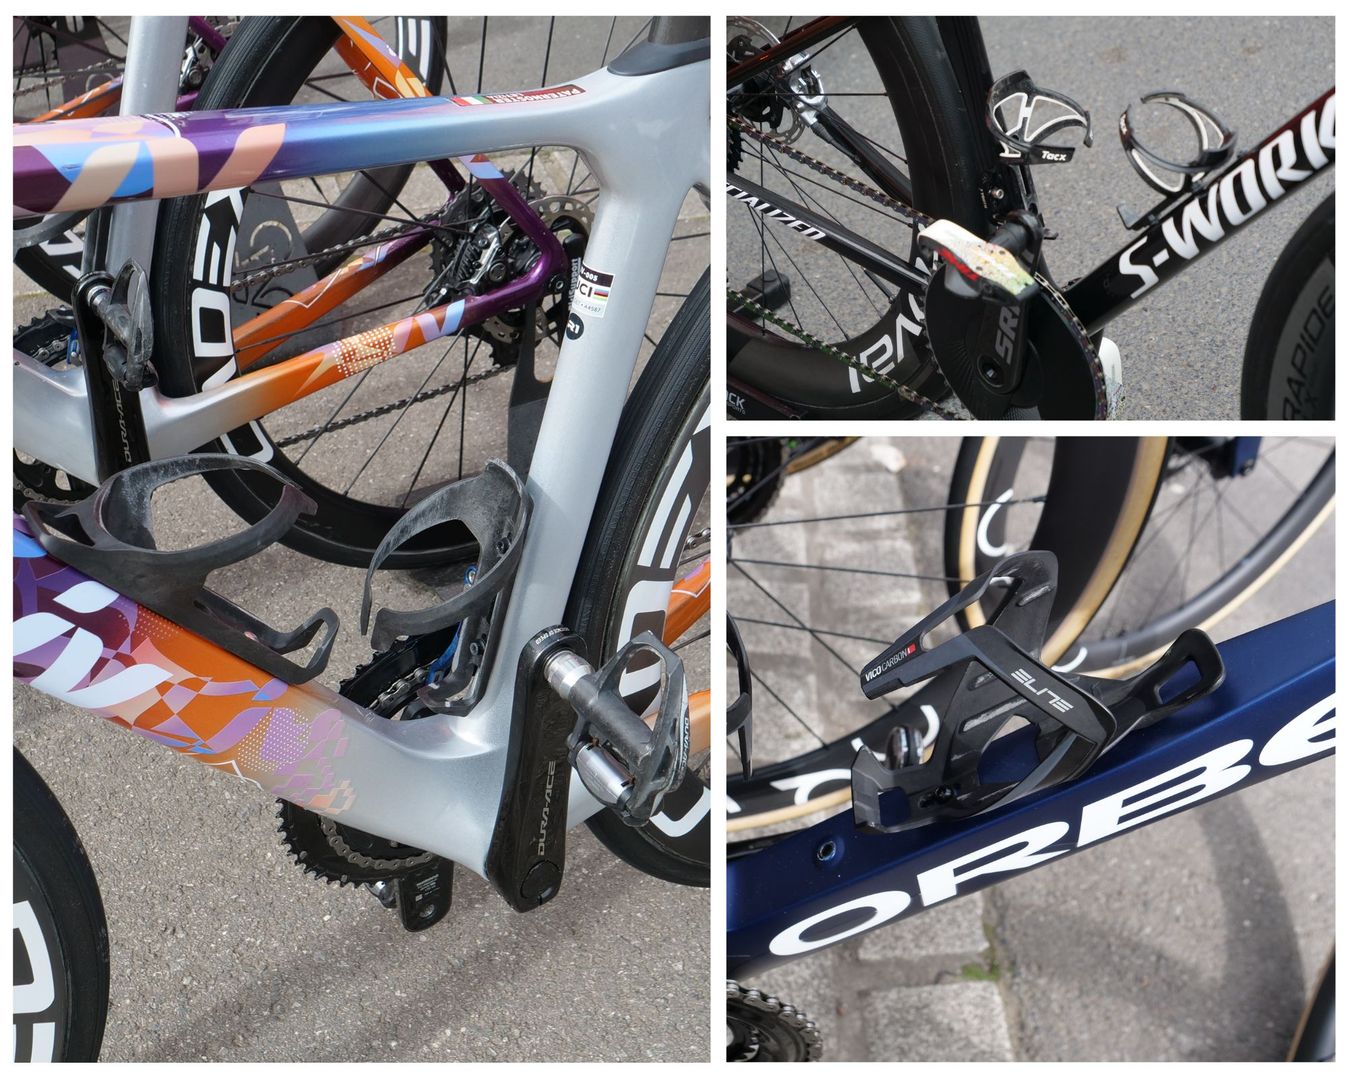 Carbon bottle cages were replaced in favour of more sturdy plastic or metal cages